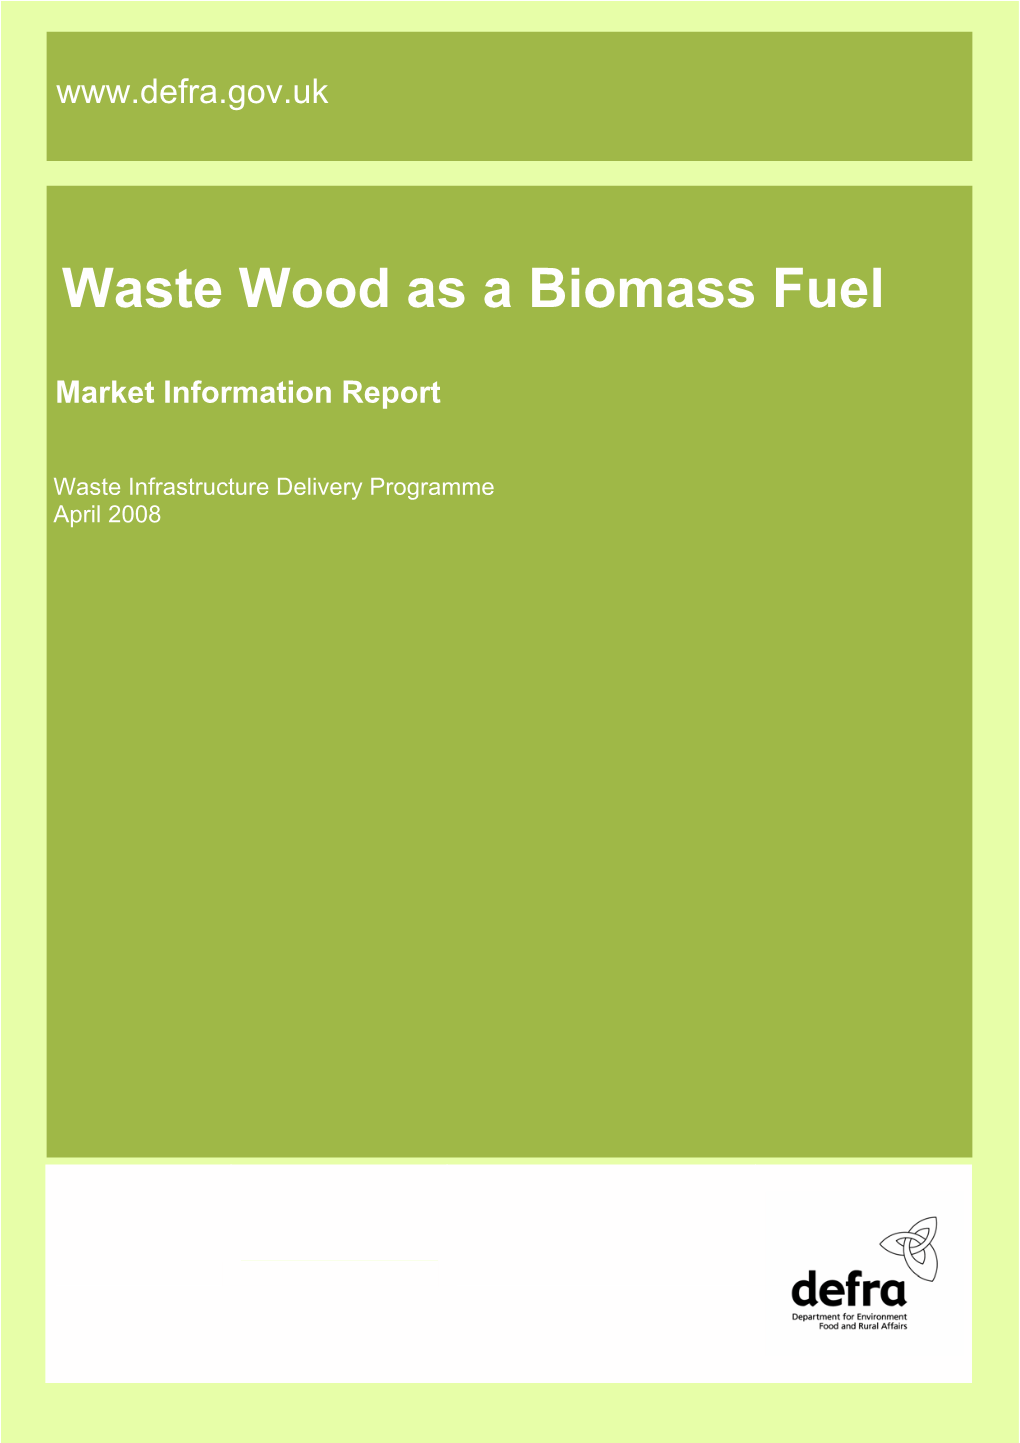 Waste Wood As a Biomass Fuel